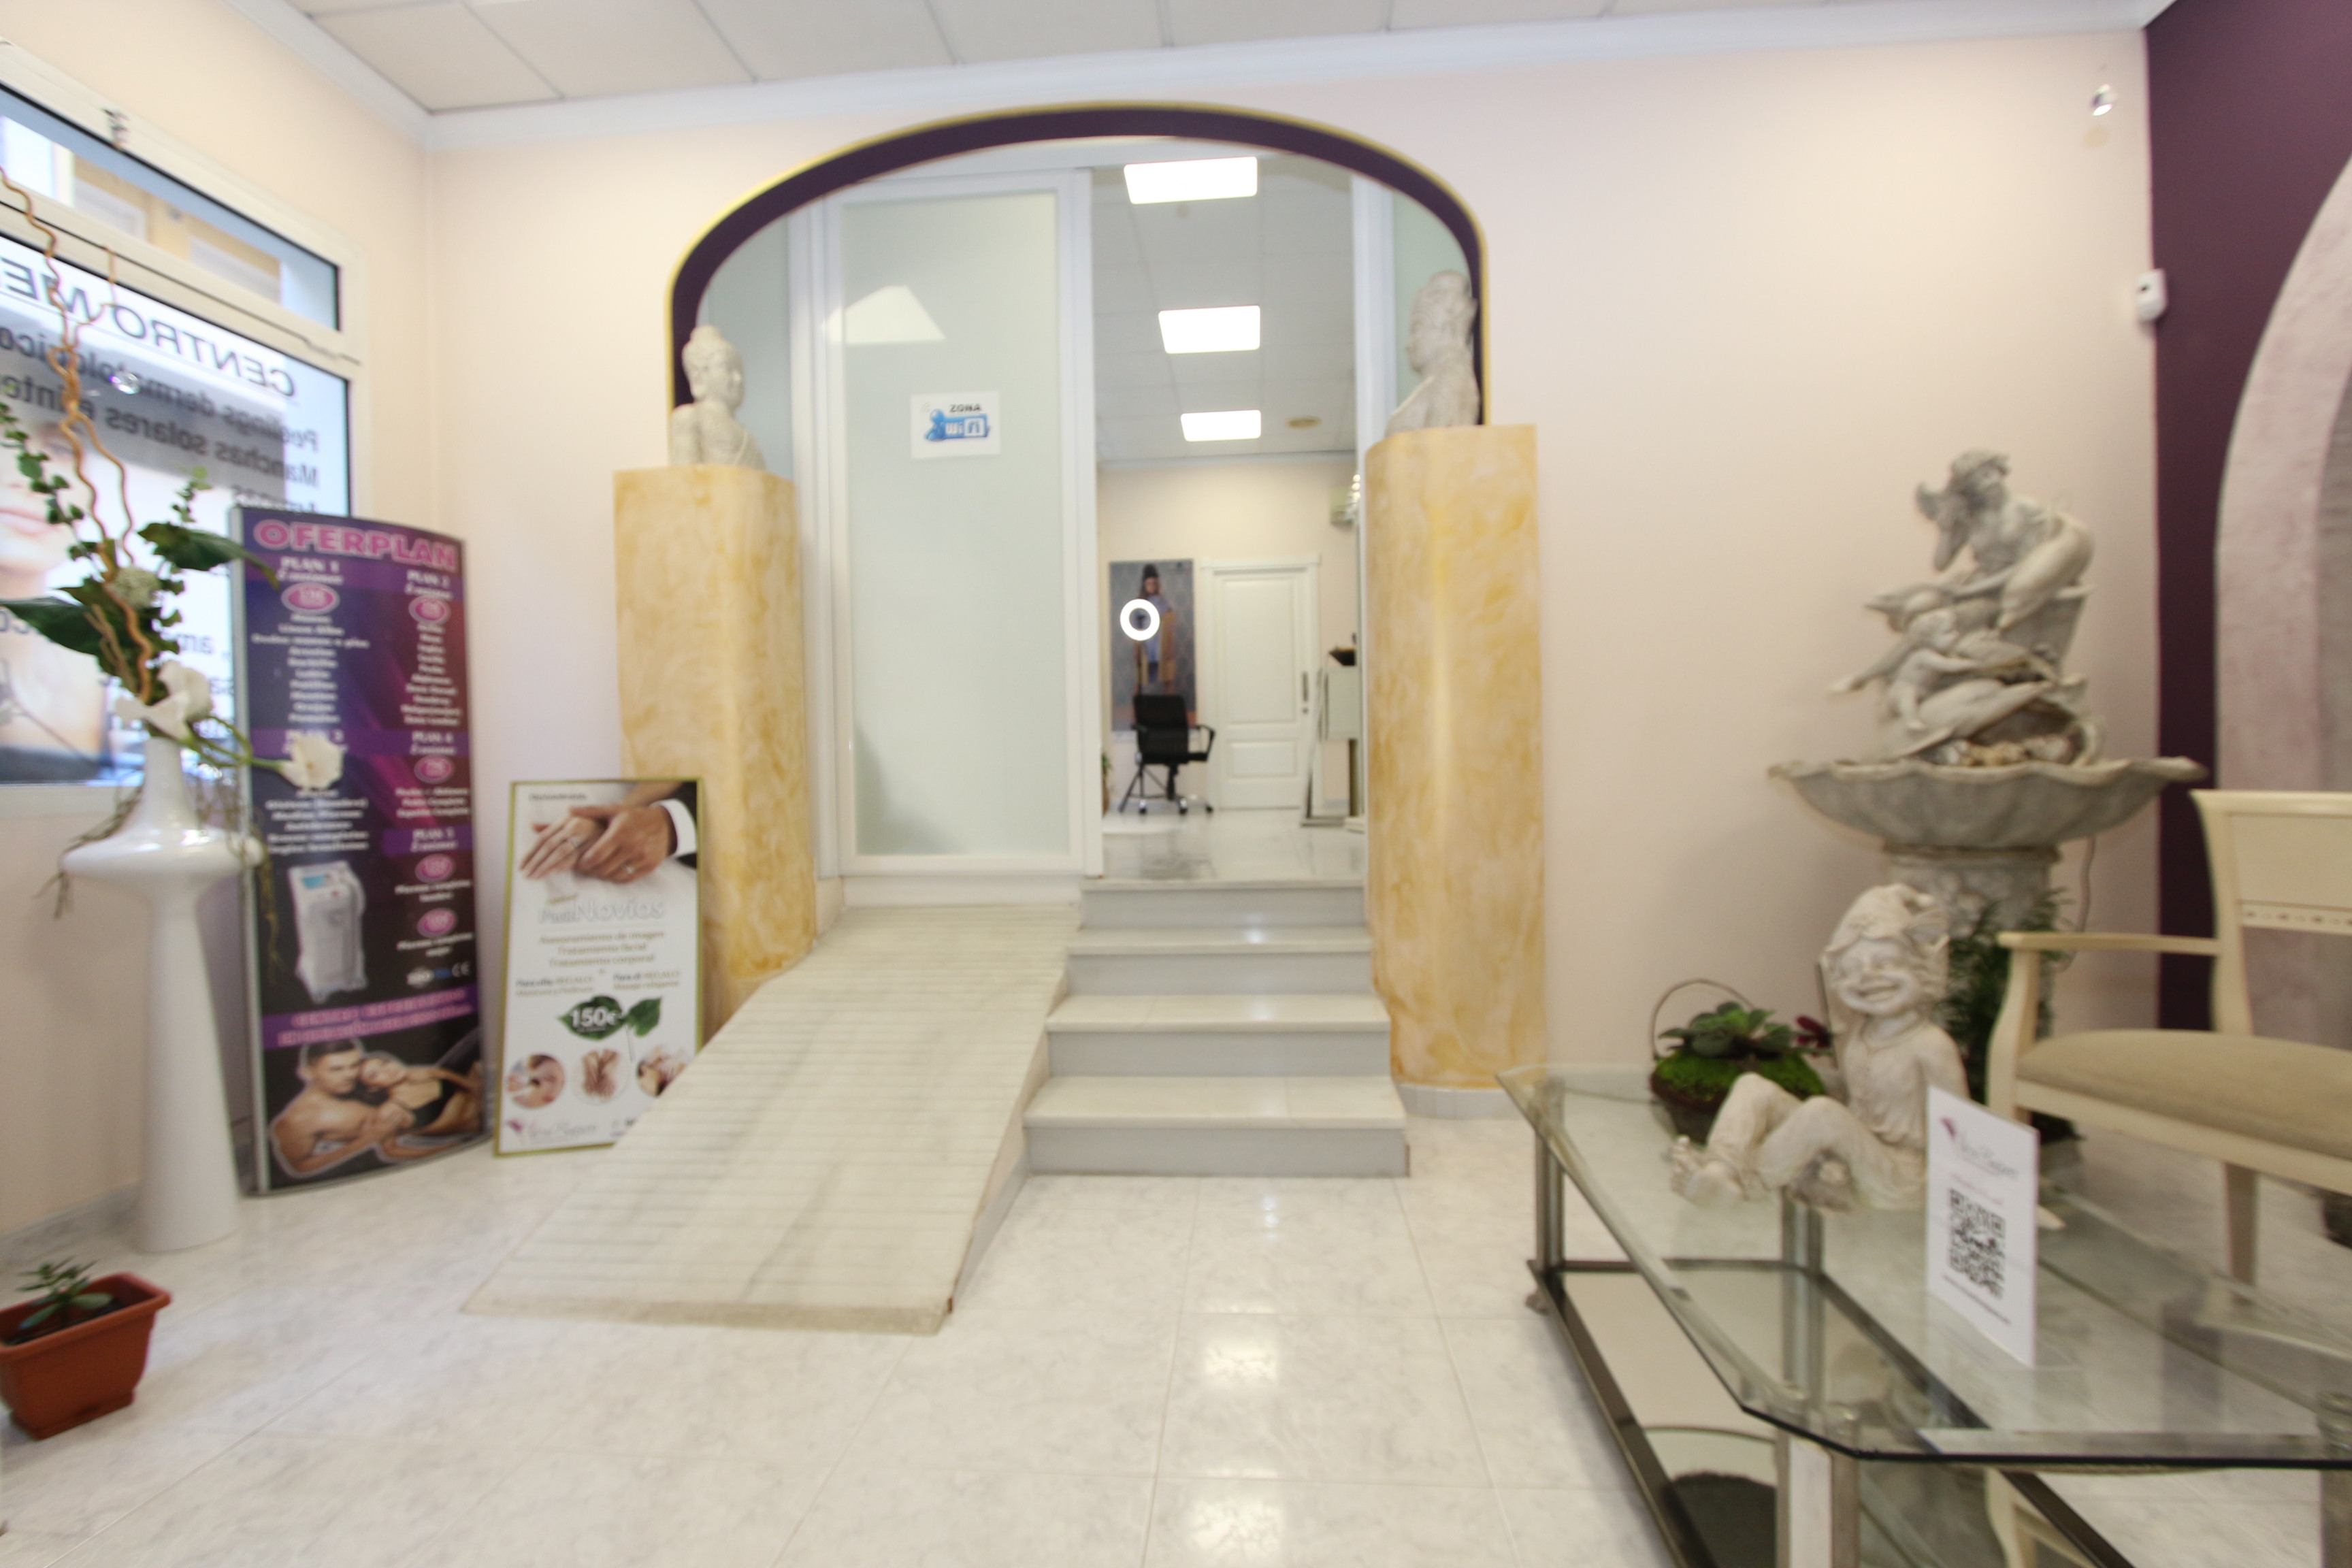 FOR SALE COMMERCIAL PREMISES WITH FULLY OPERATING BUSINESS OF 340 M2 IN THE CENTER OF CALPE